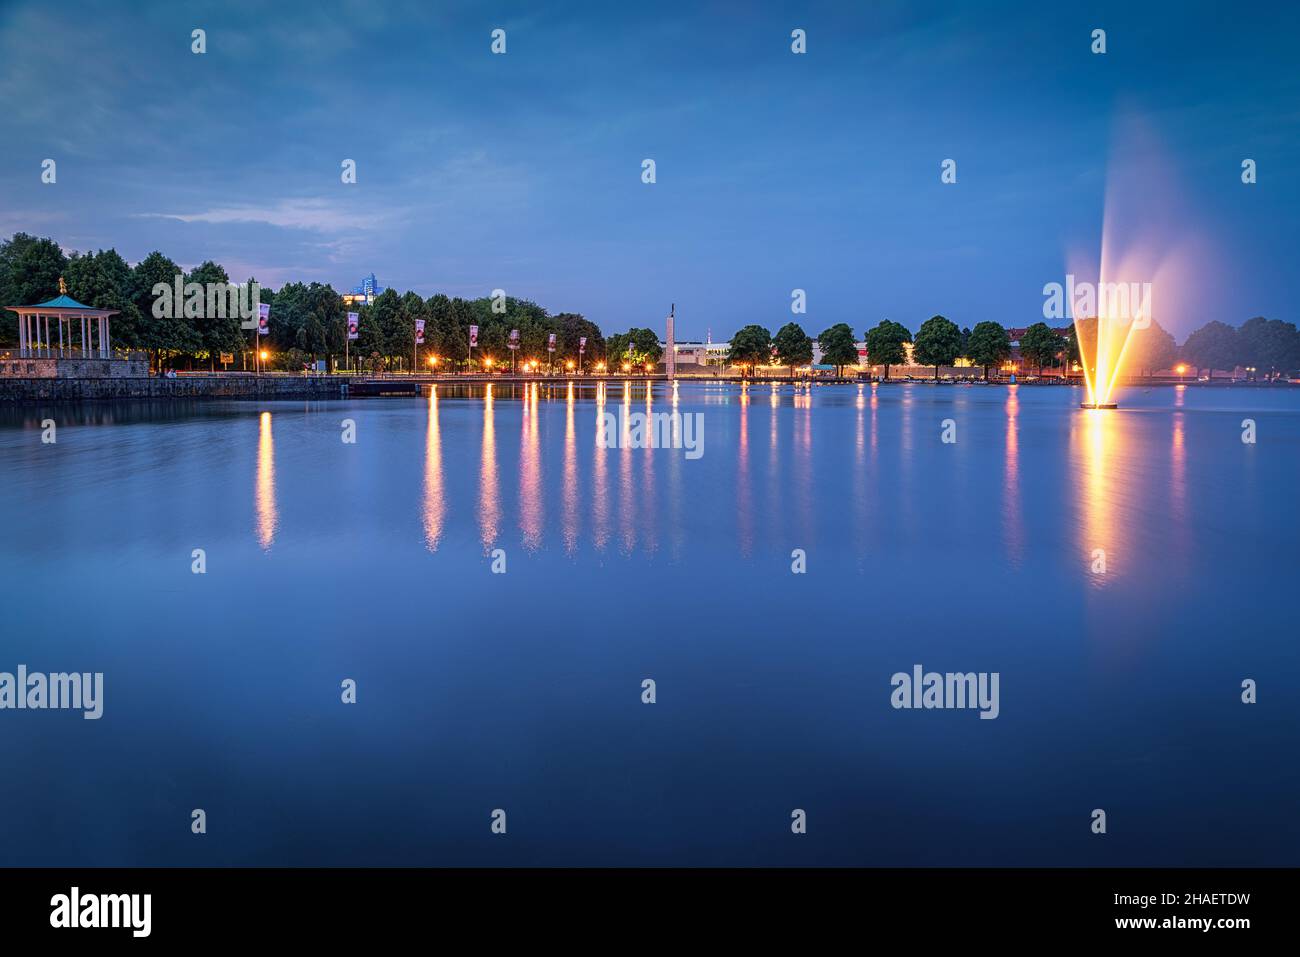 A scenic view at the Masch lake with lights and sky reflecting on the surface in Hanover, Germany Stock Photo